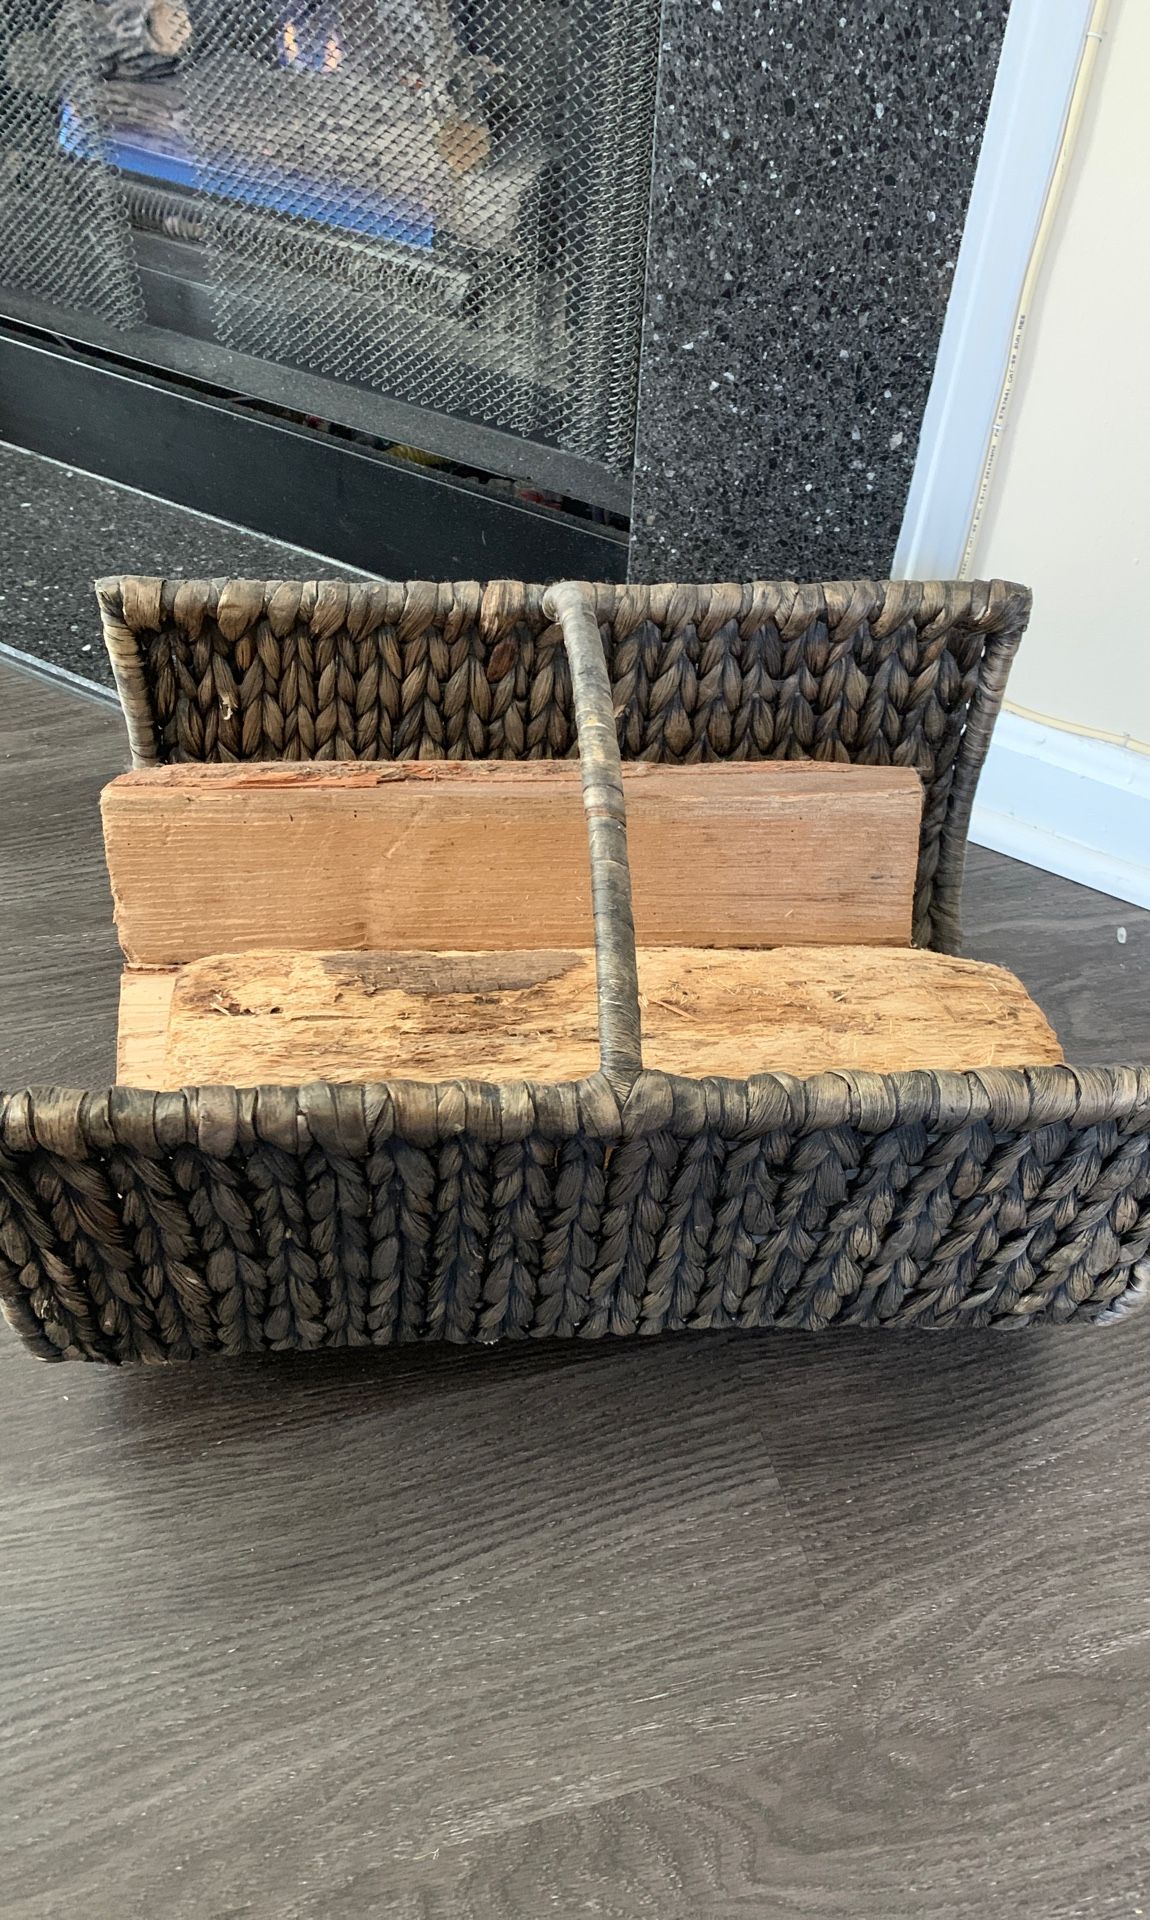 Fire wood and basket